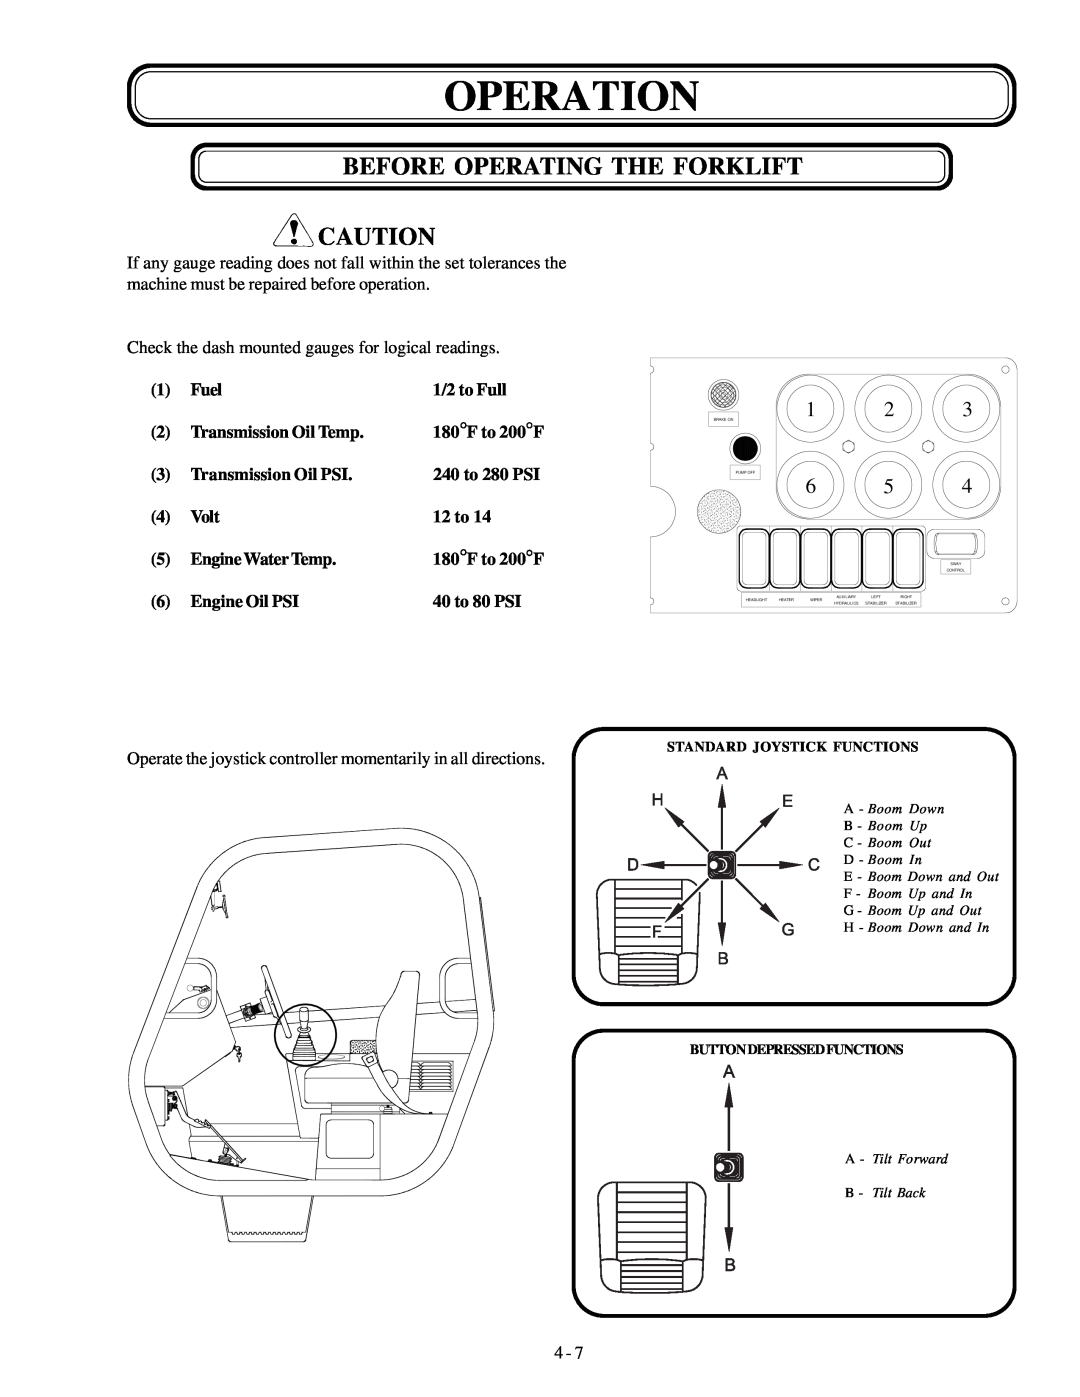 Genie GTH-636 manual Before Operating The Forklift, Operation 